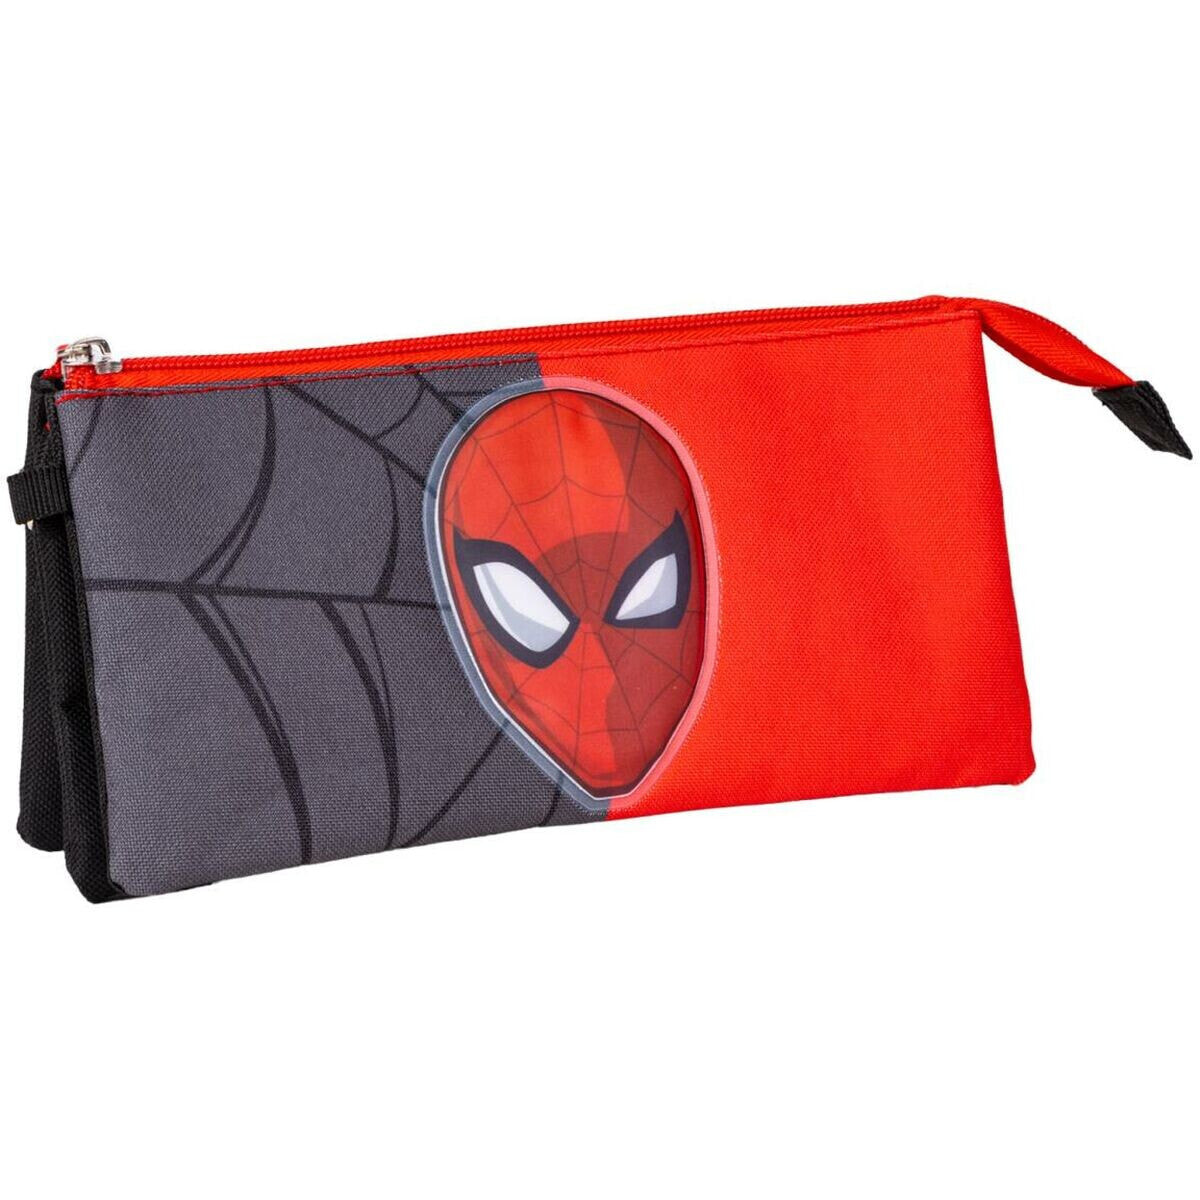 Triple Carry-all Spider-Man Red Black 22,5 x 2 x 11,5 cm